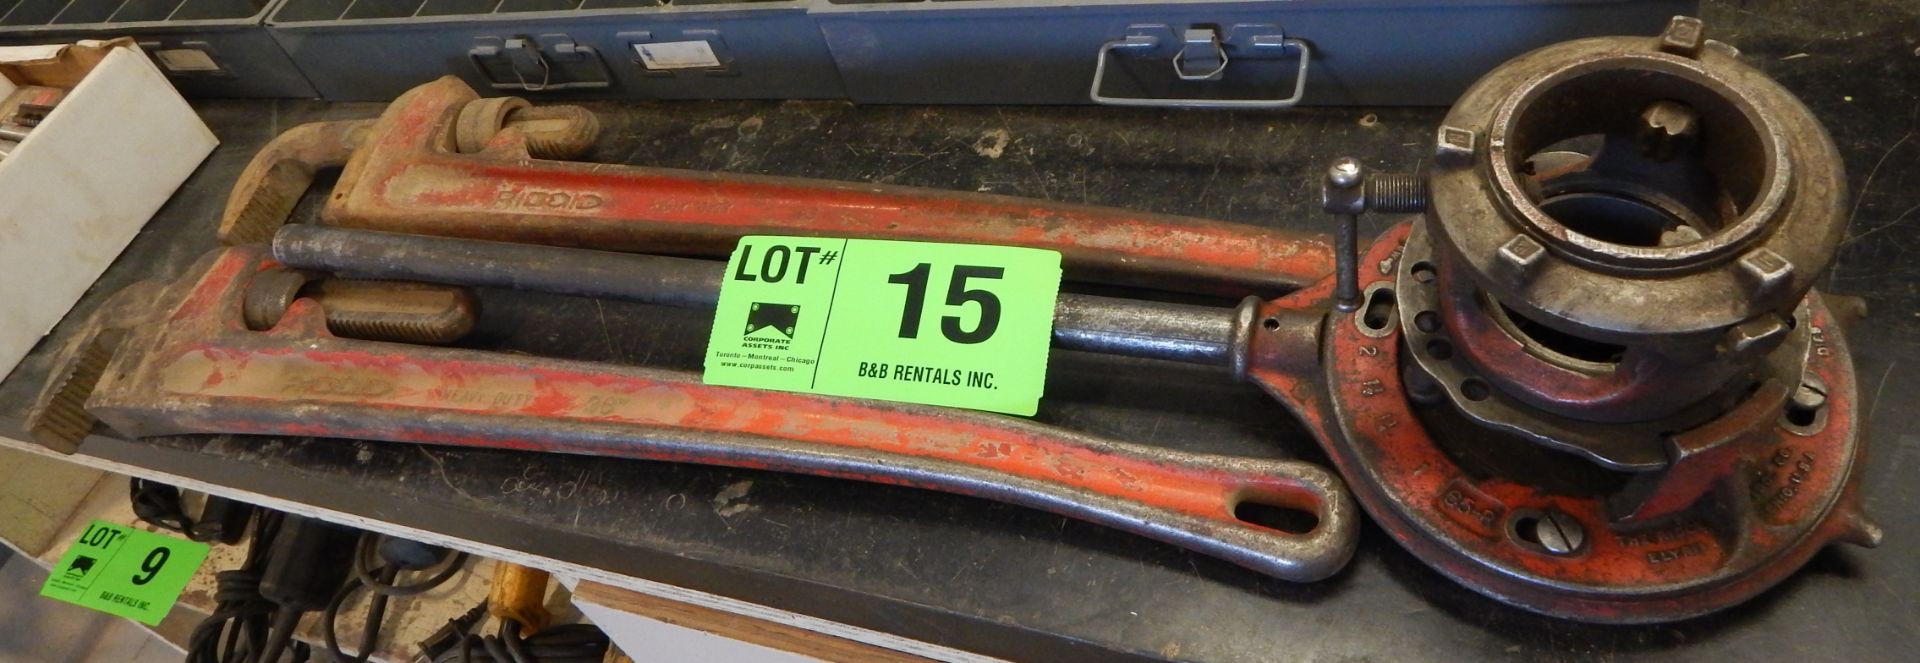 LOT/ RIDGID ADJUSTABLE PIPE THREADER AND RIDGID PIPE WRENCHES